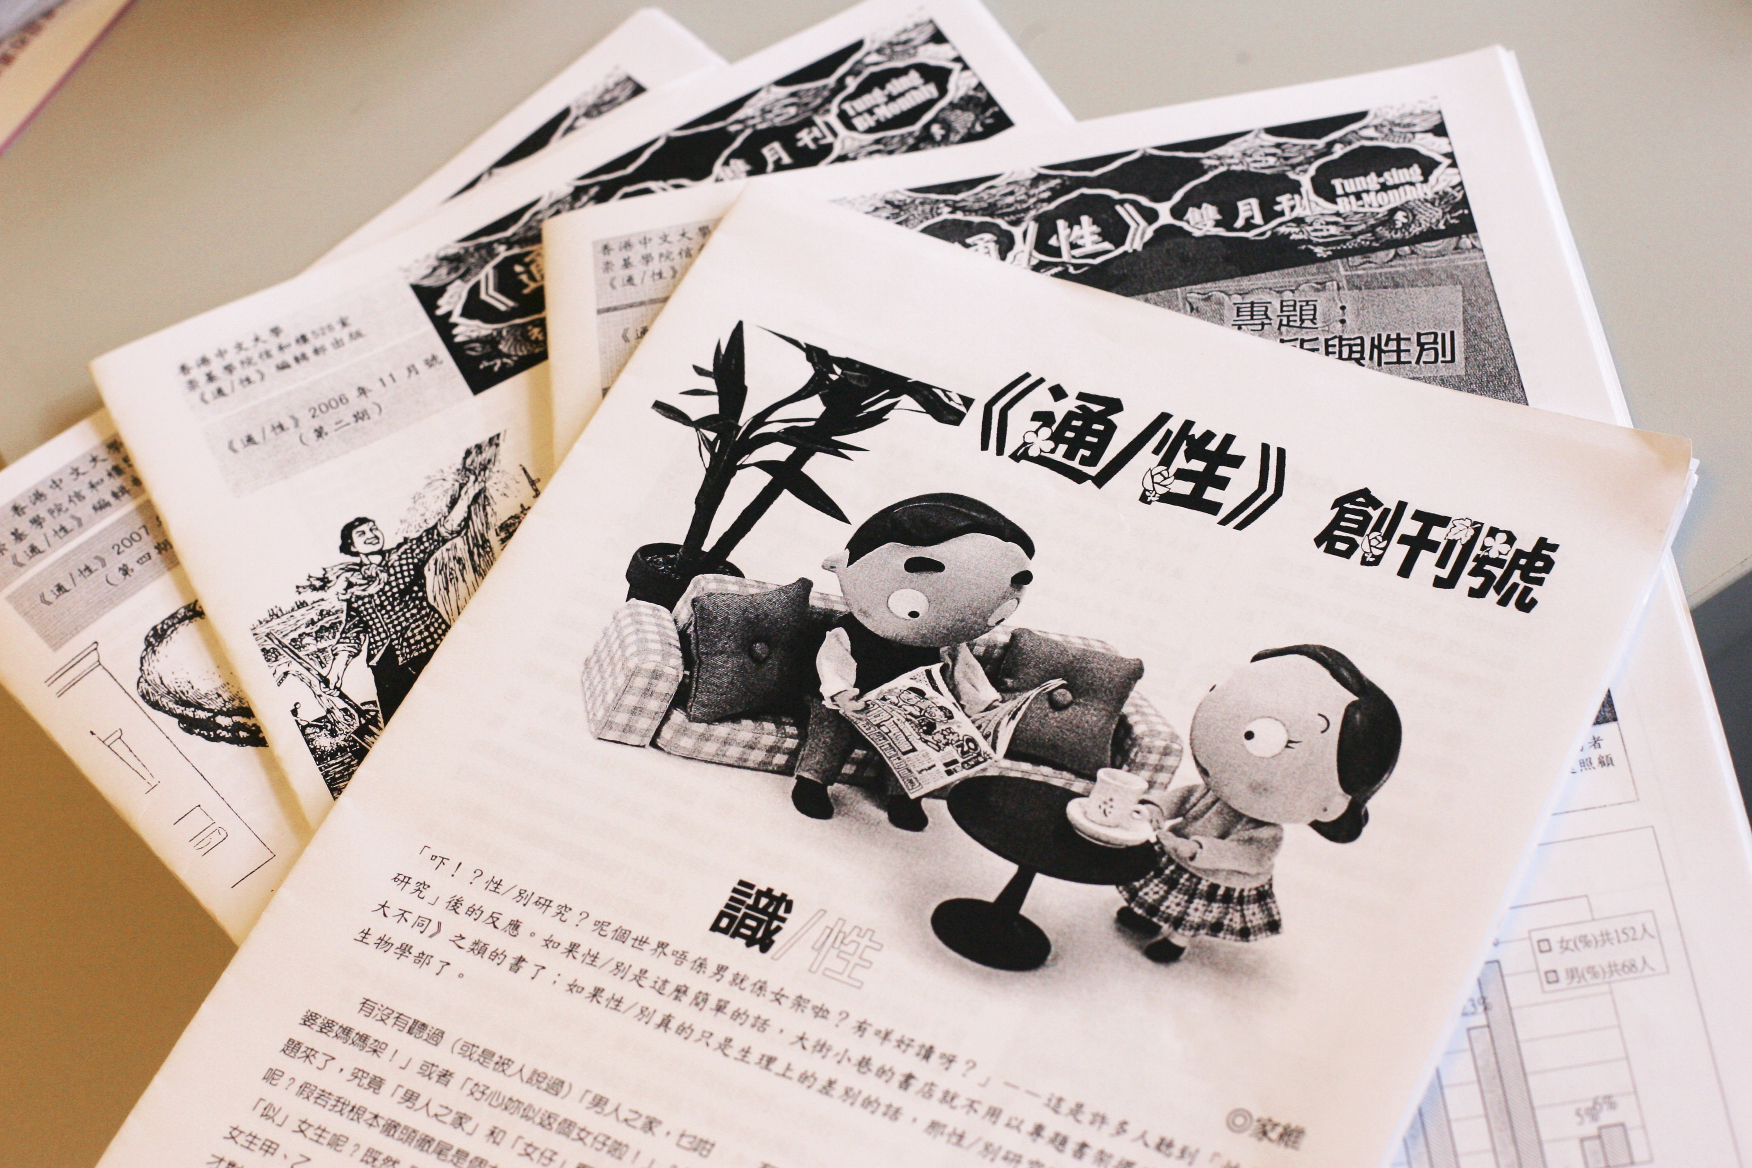 LG magazine, published by gender studies students from the Chinese University of Hong Kong. Photo: Ricky Chung